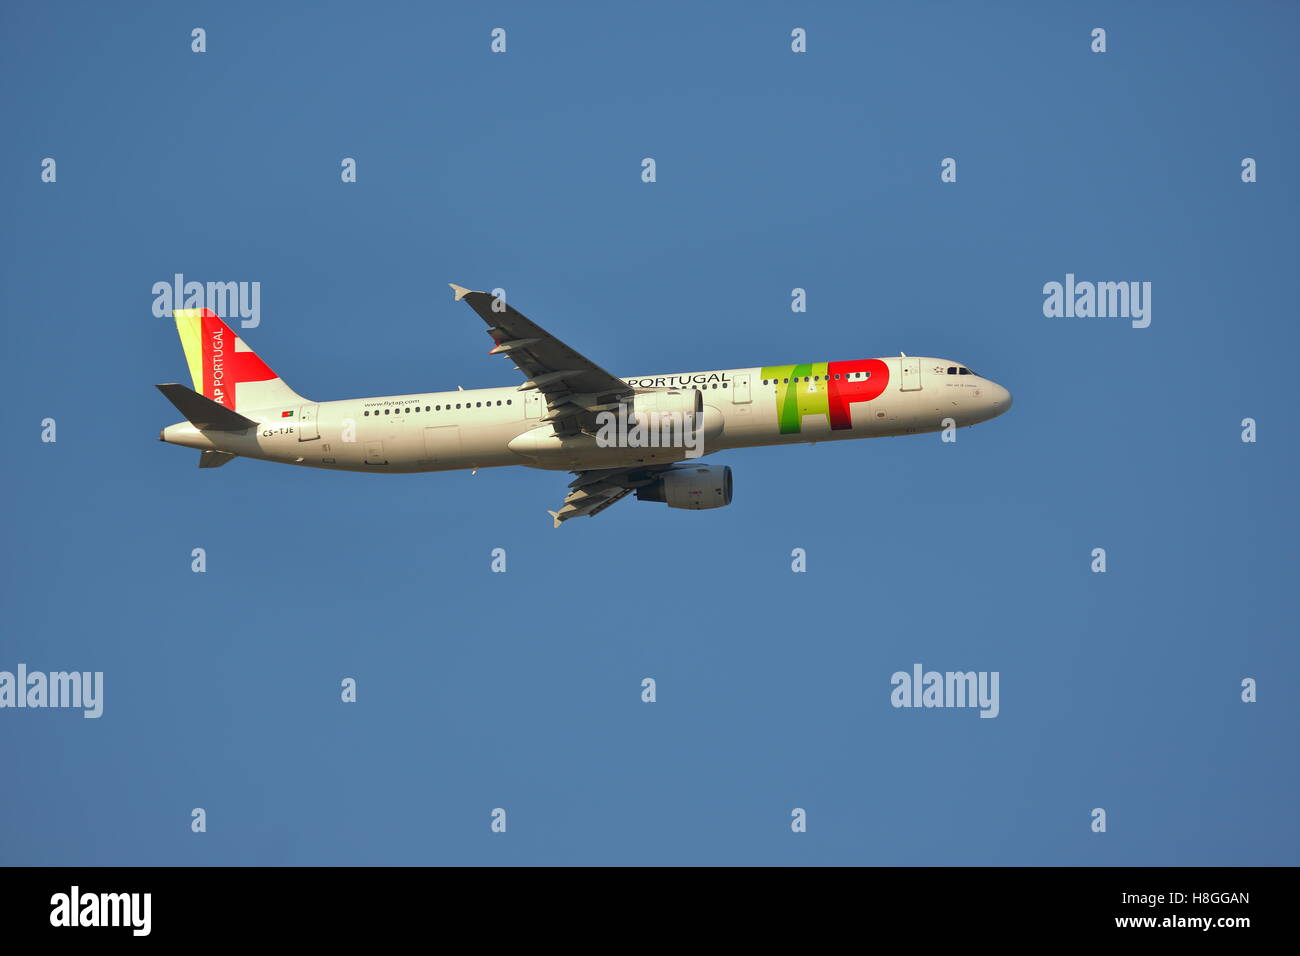 TAP Portugal Airbus A321-200 CS-TJE departing from London Heathrow Airport, UK Stock Photo